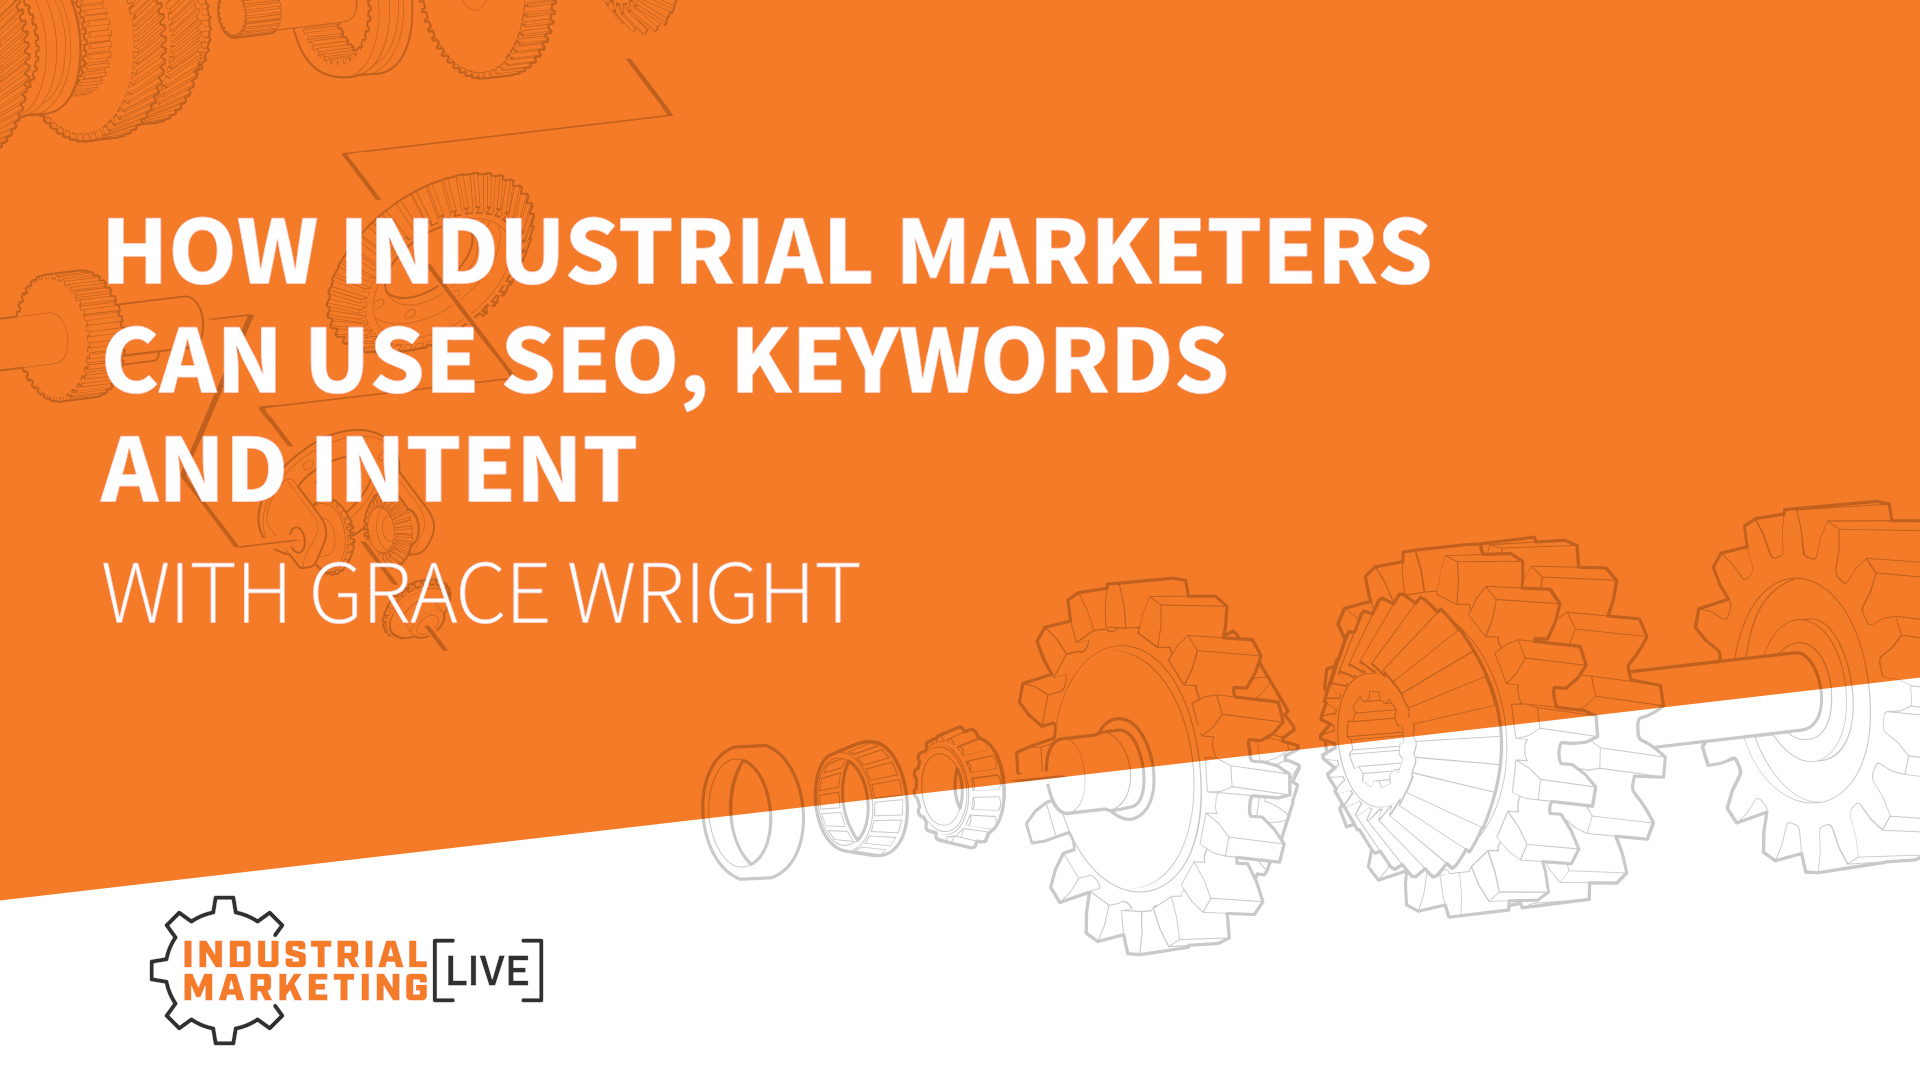 How Industrial Marketers can use SEO, Keywords and Intent